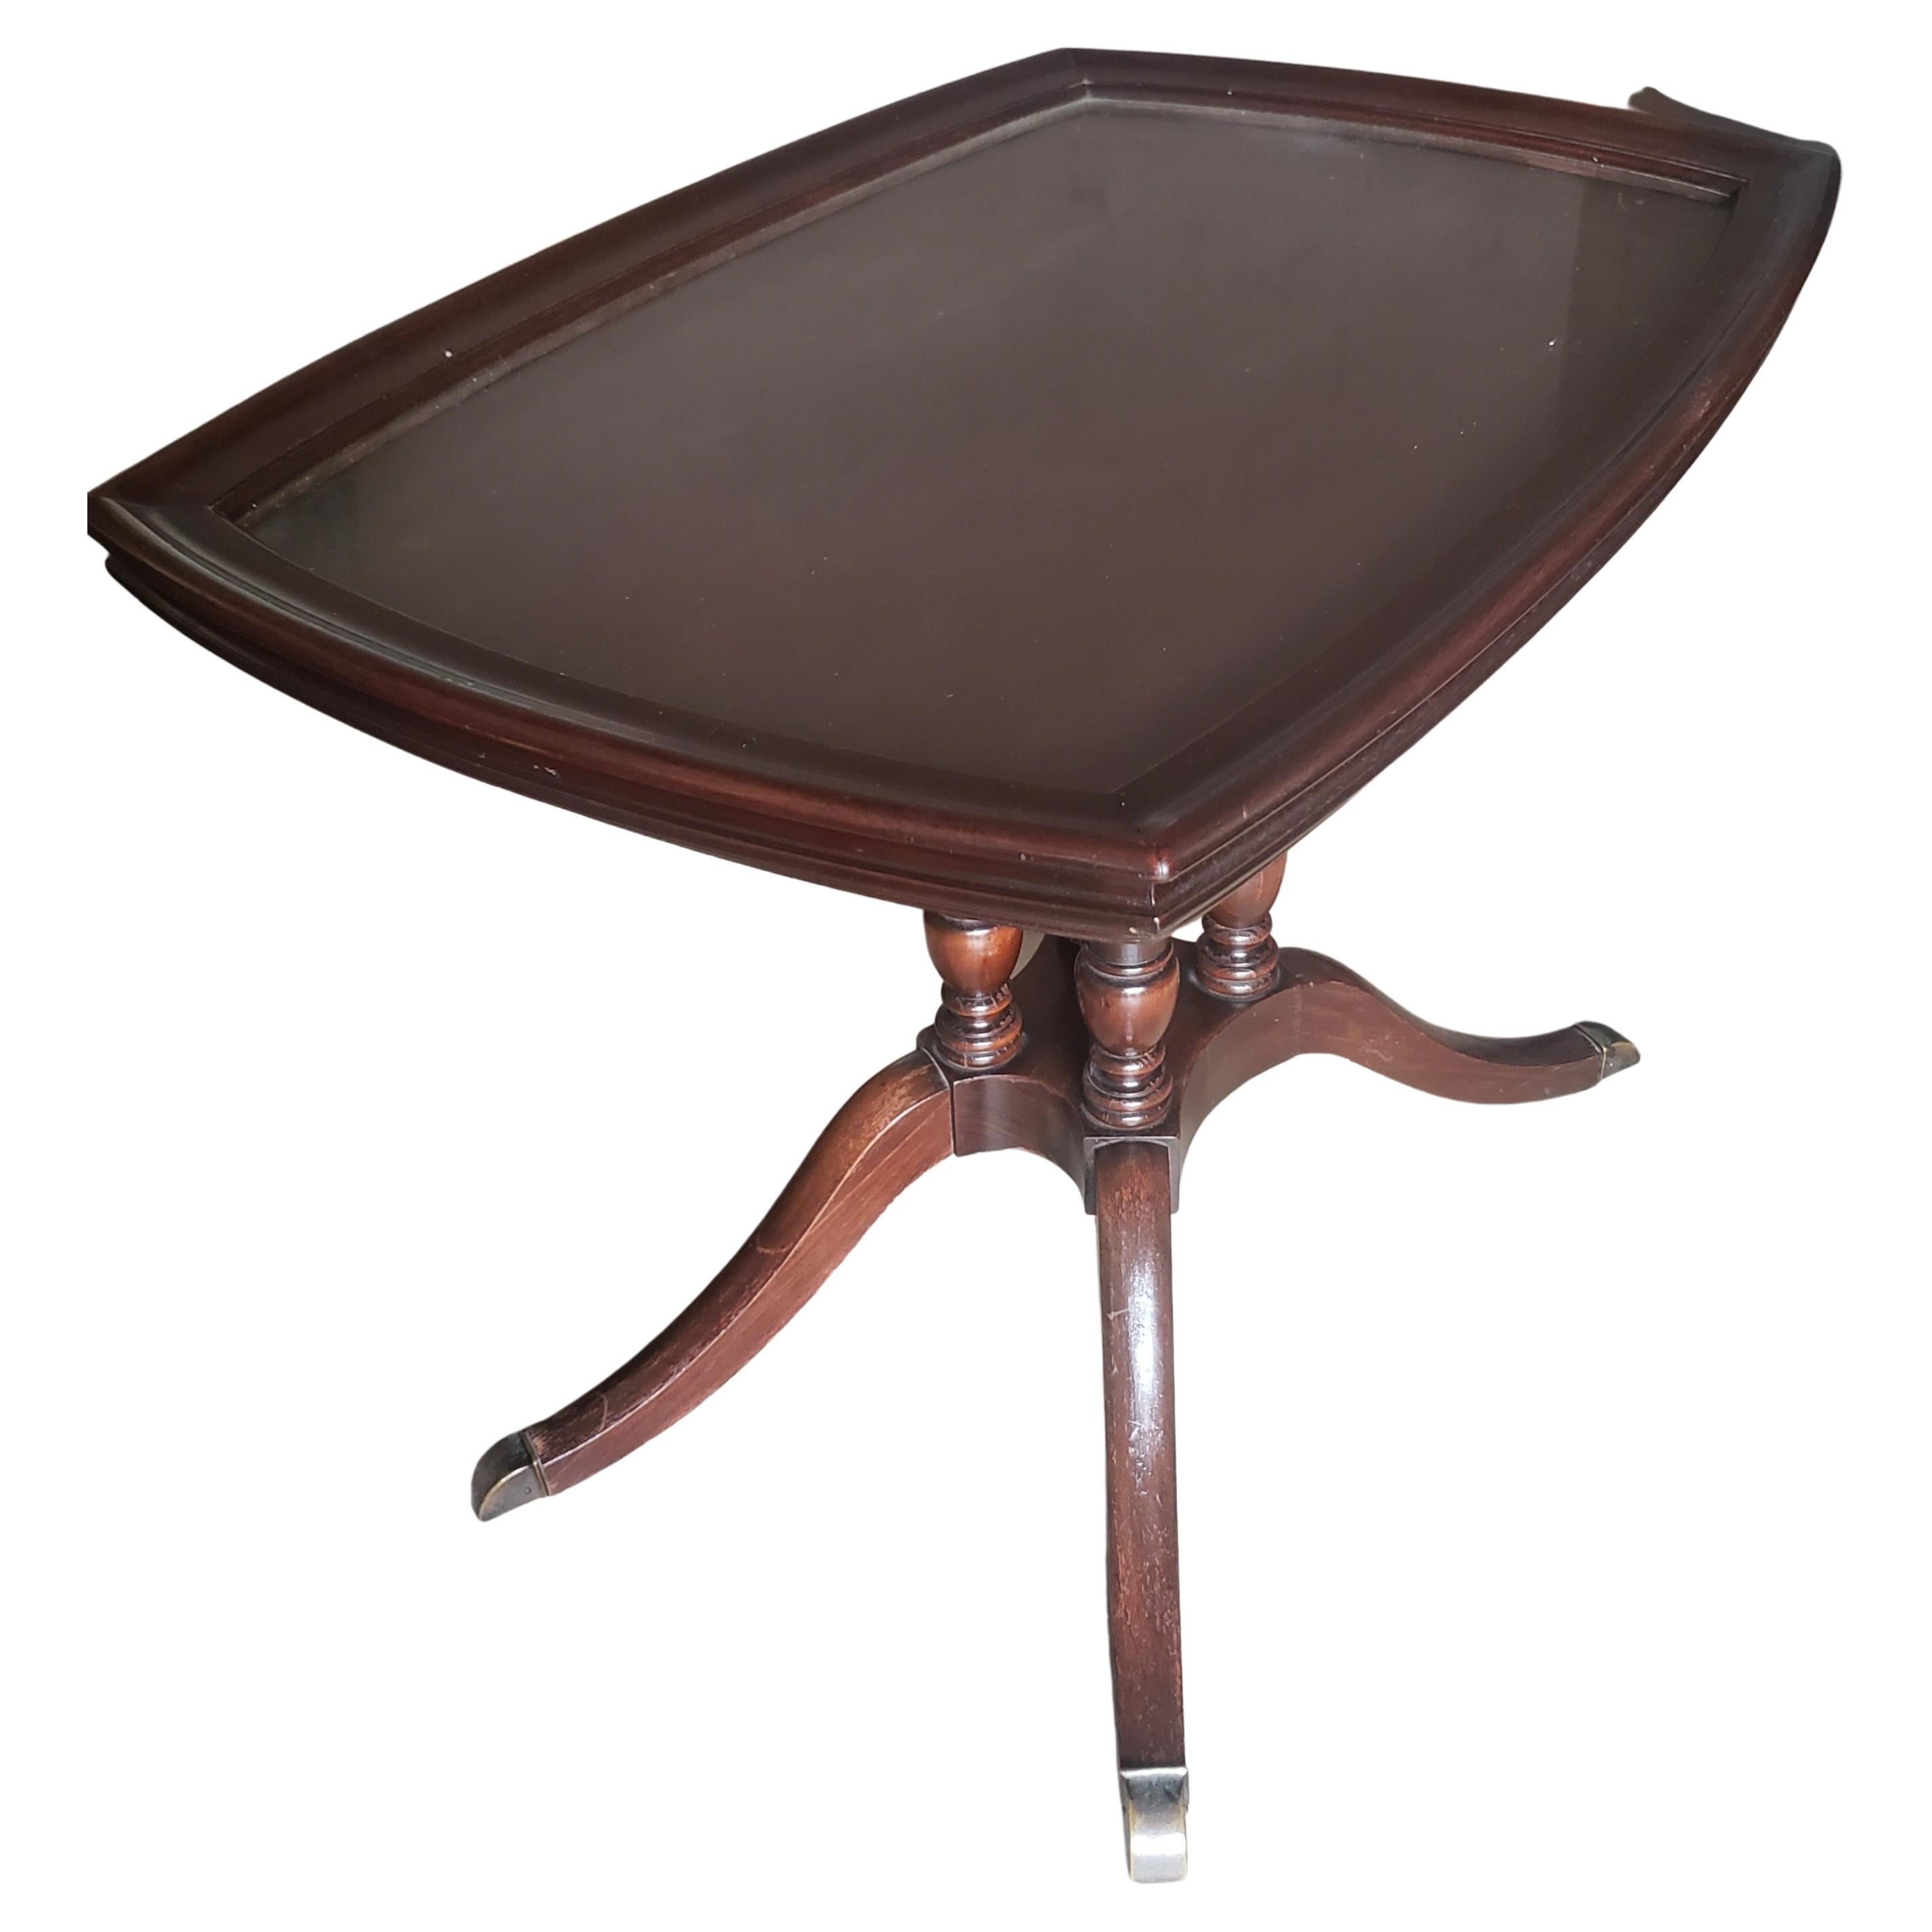 A 1940s Brandt Furniture Mahogany Side Table with Glass Tray. Features a quadpod pedestal terminating with 4 brass paw feet.
